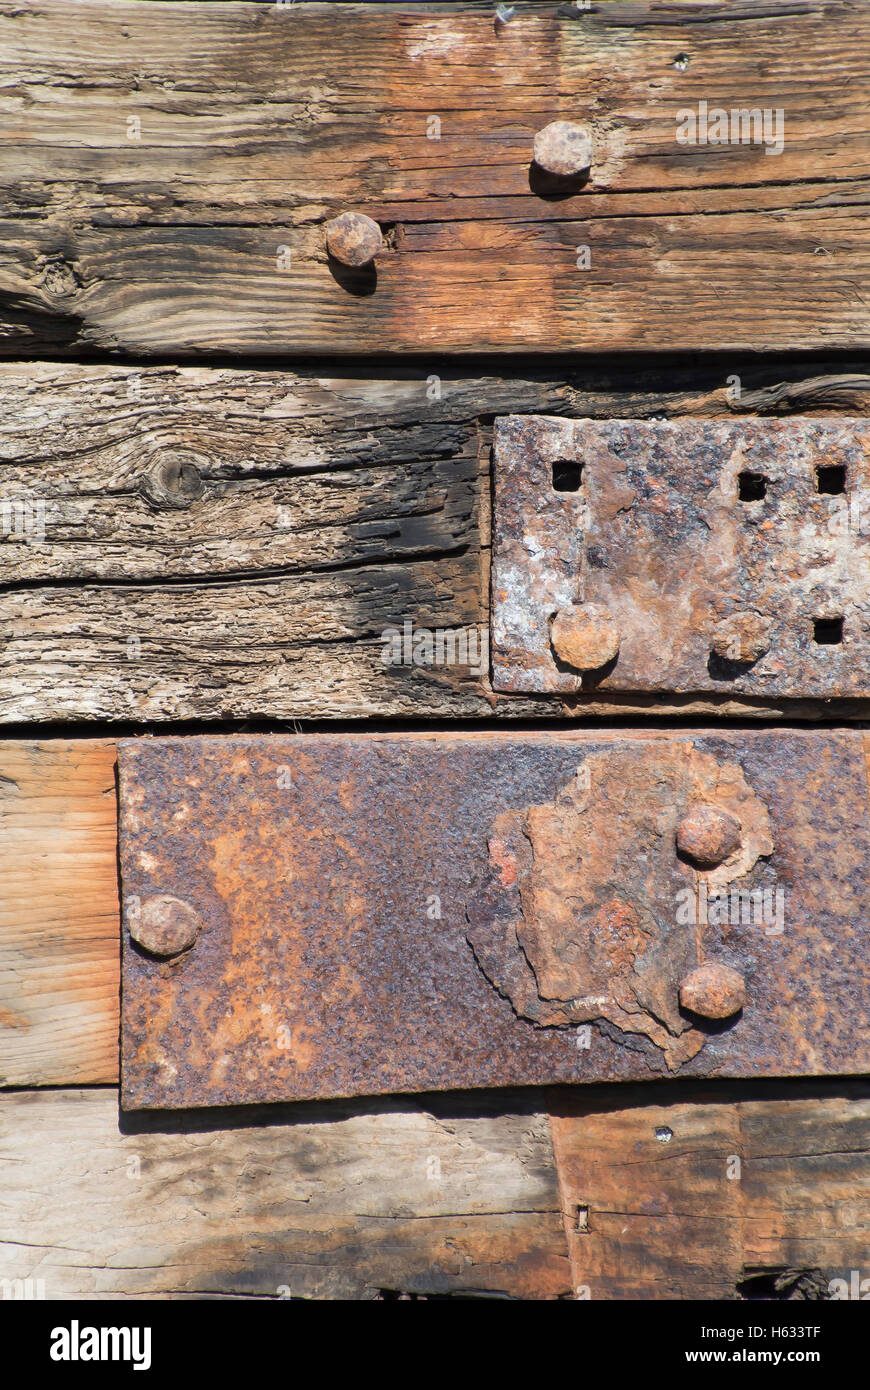 Close-Up of Rusty Nails on Old Board Stock Photo